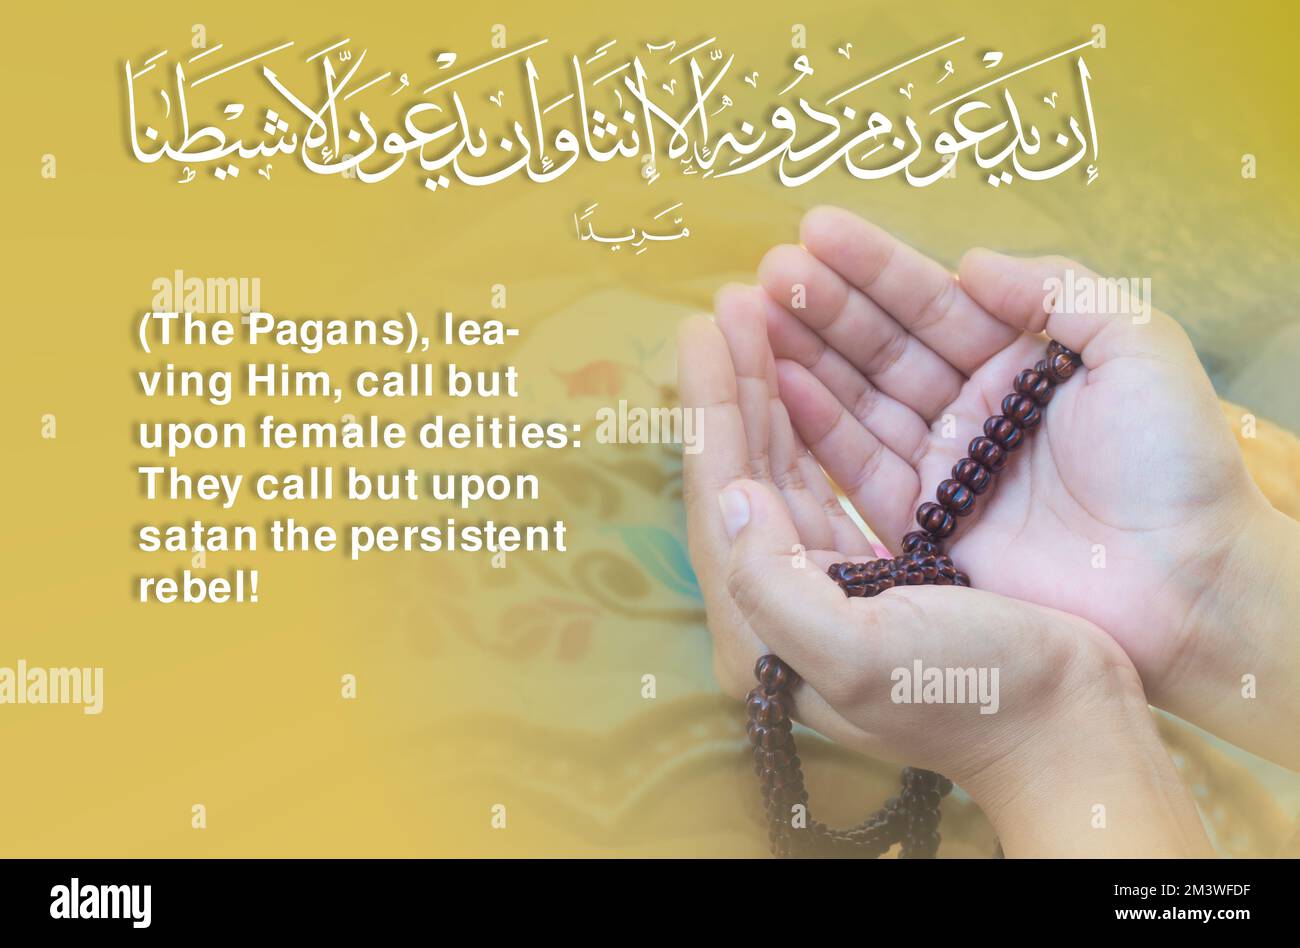 Young Muslim woman praying, Image of dua in Arabic with English translation Surah An Nisa Ayat 117, Open palm hand of Indonesia Islamic female with pr Stock Photo